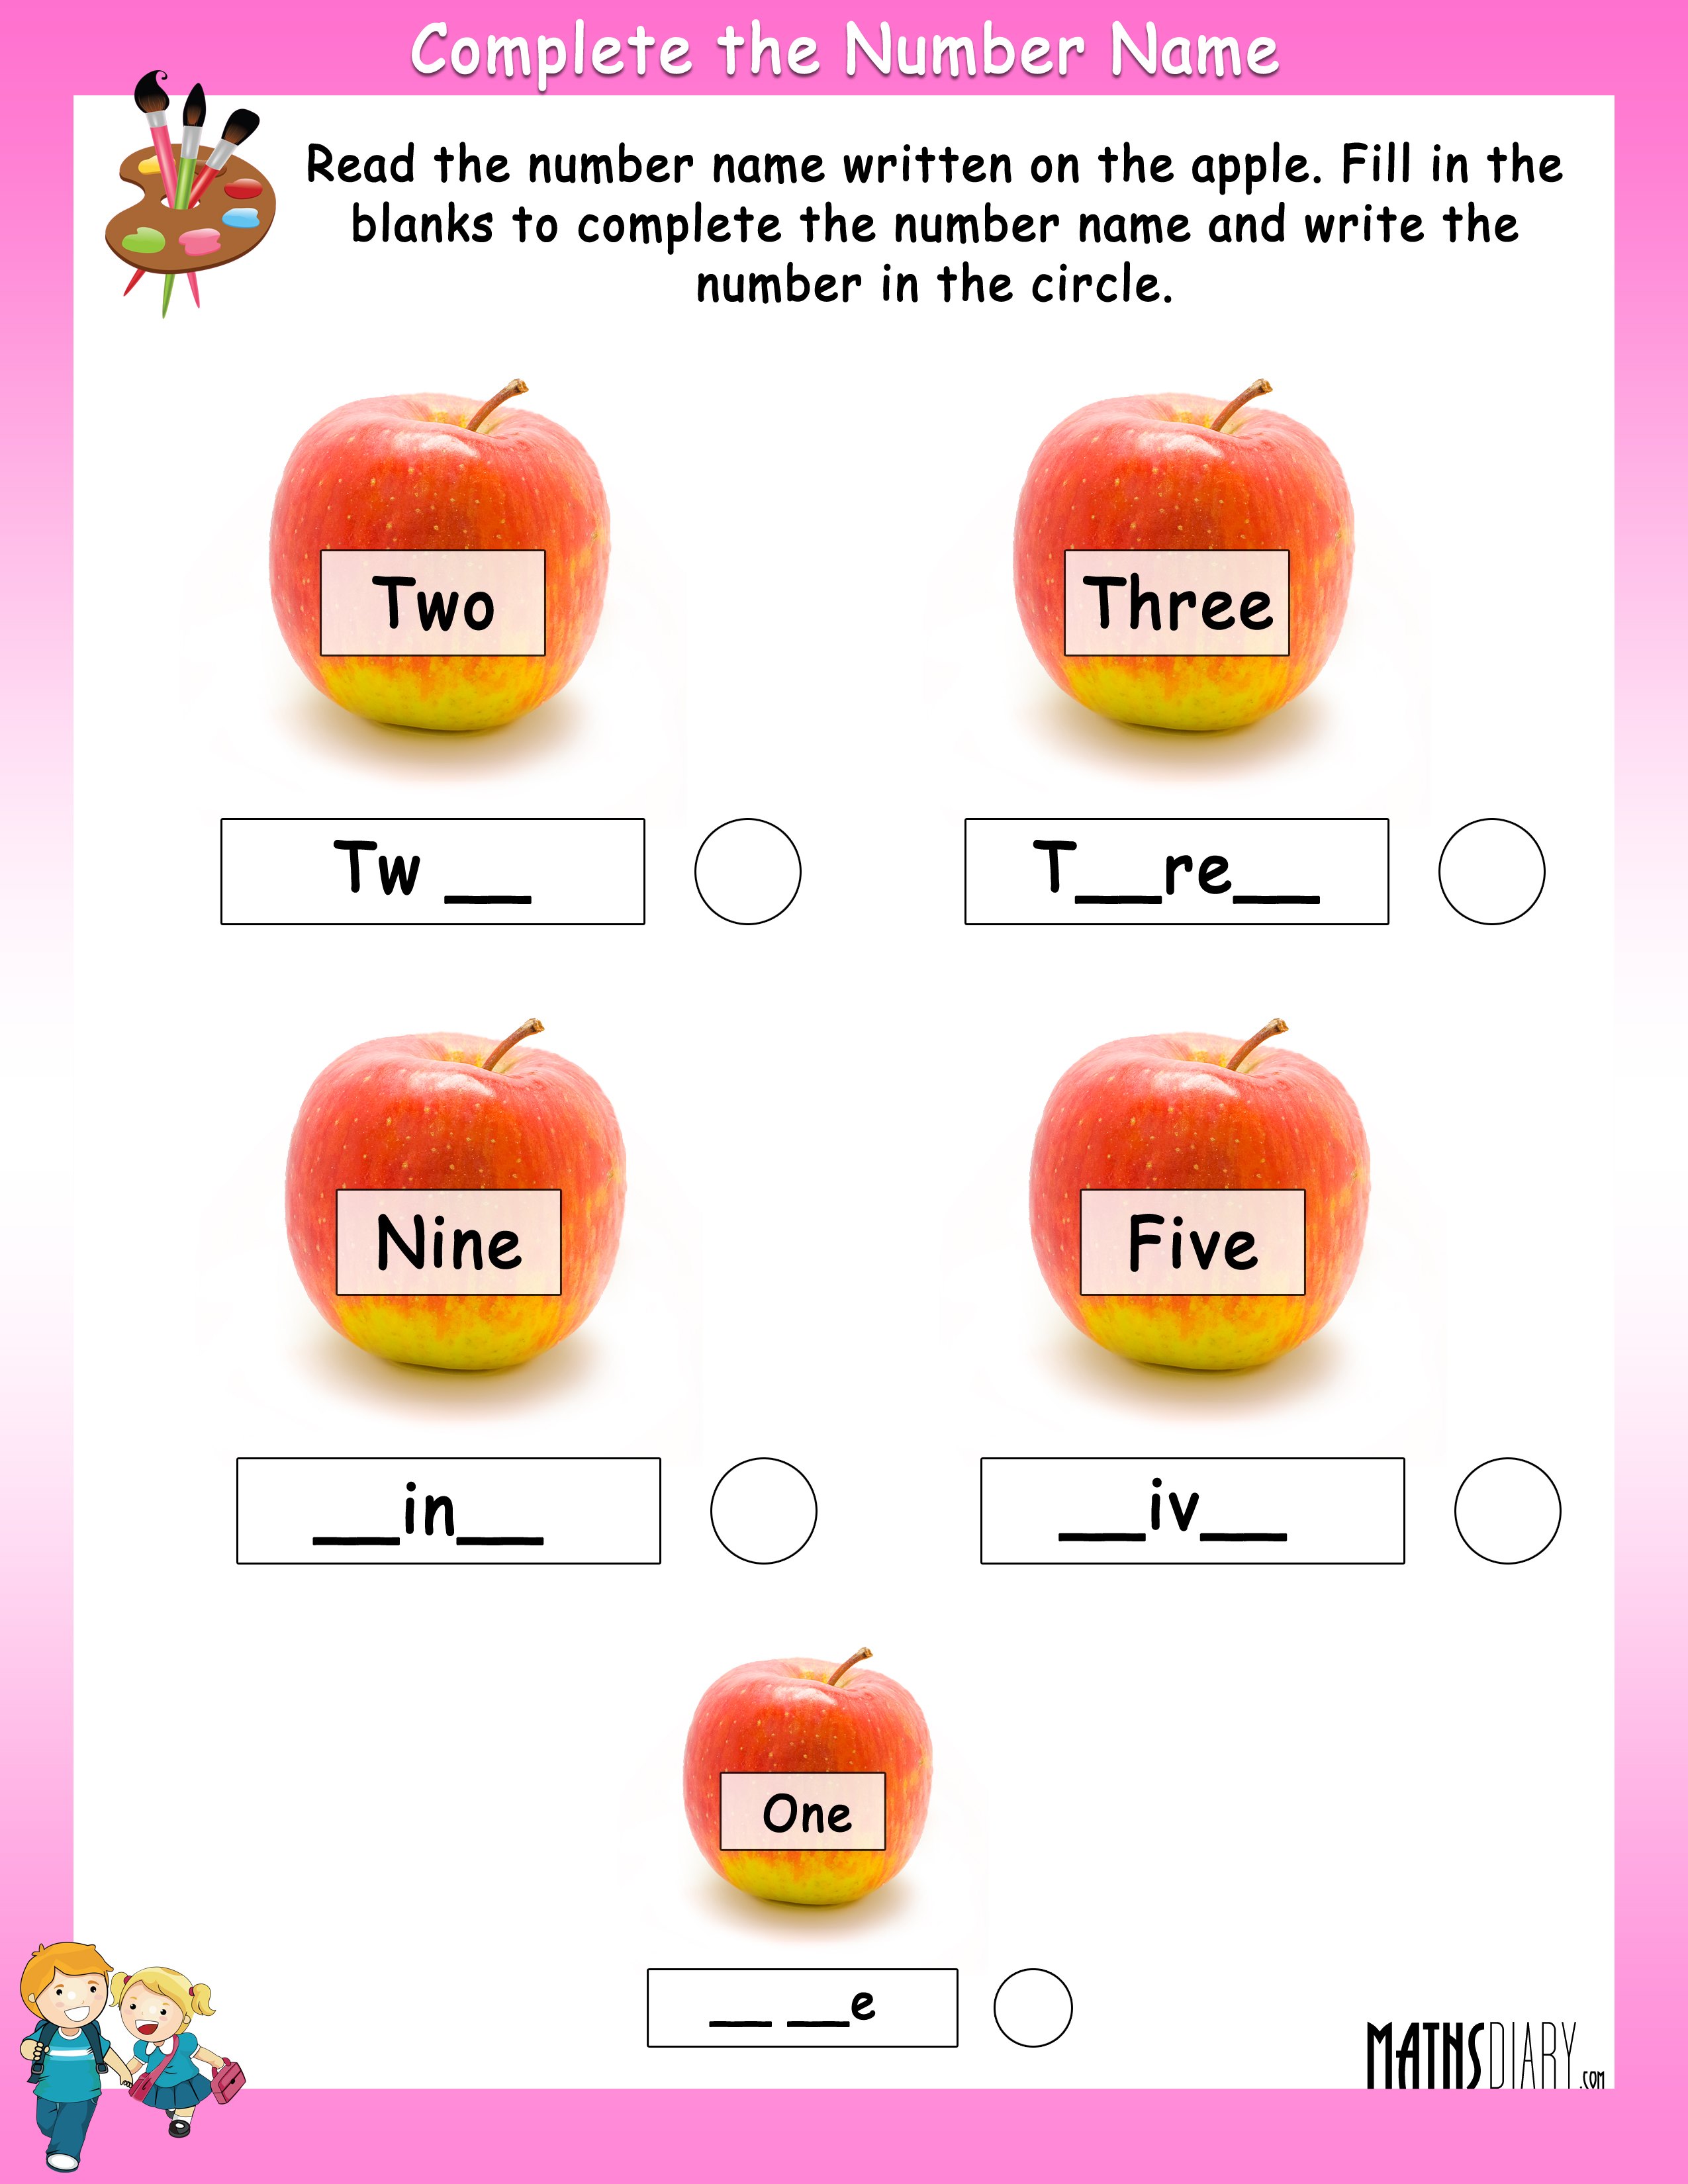 Worksheet Of Number Names For Class 4